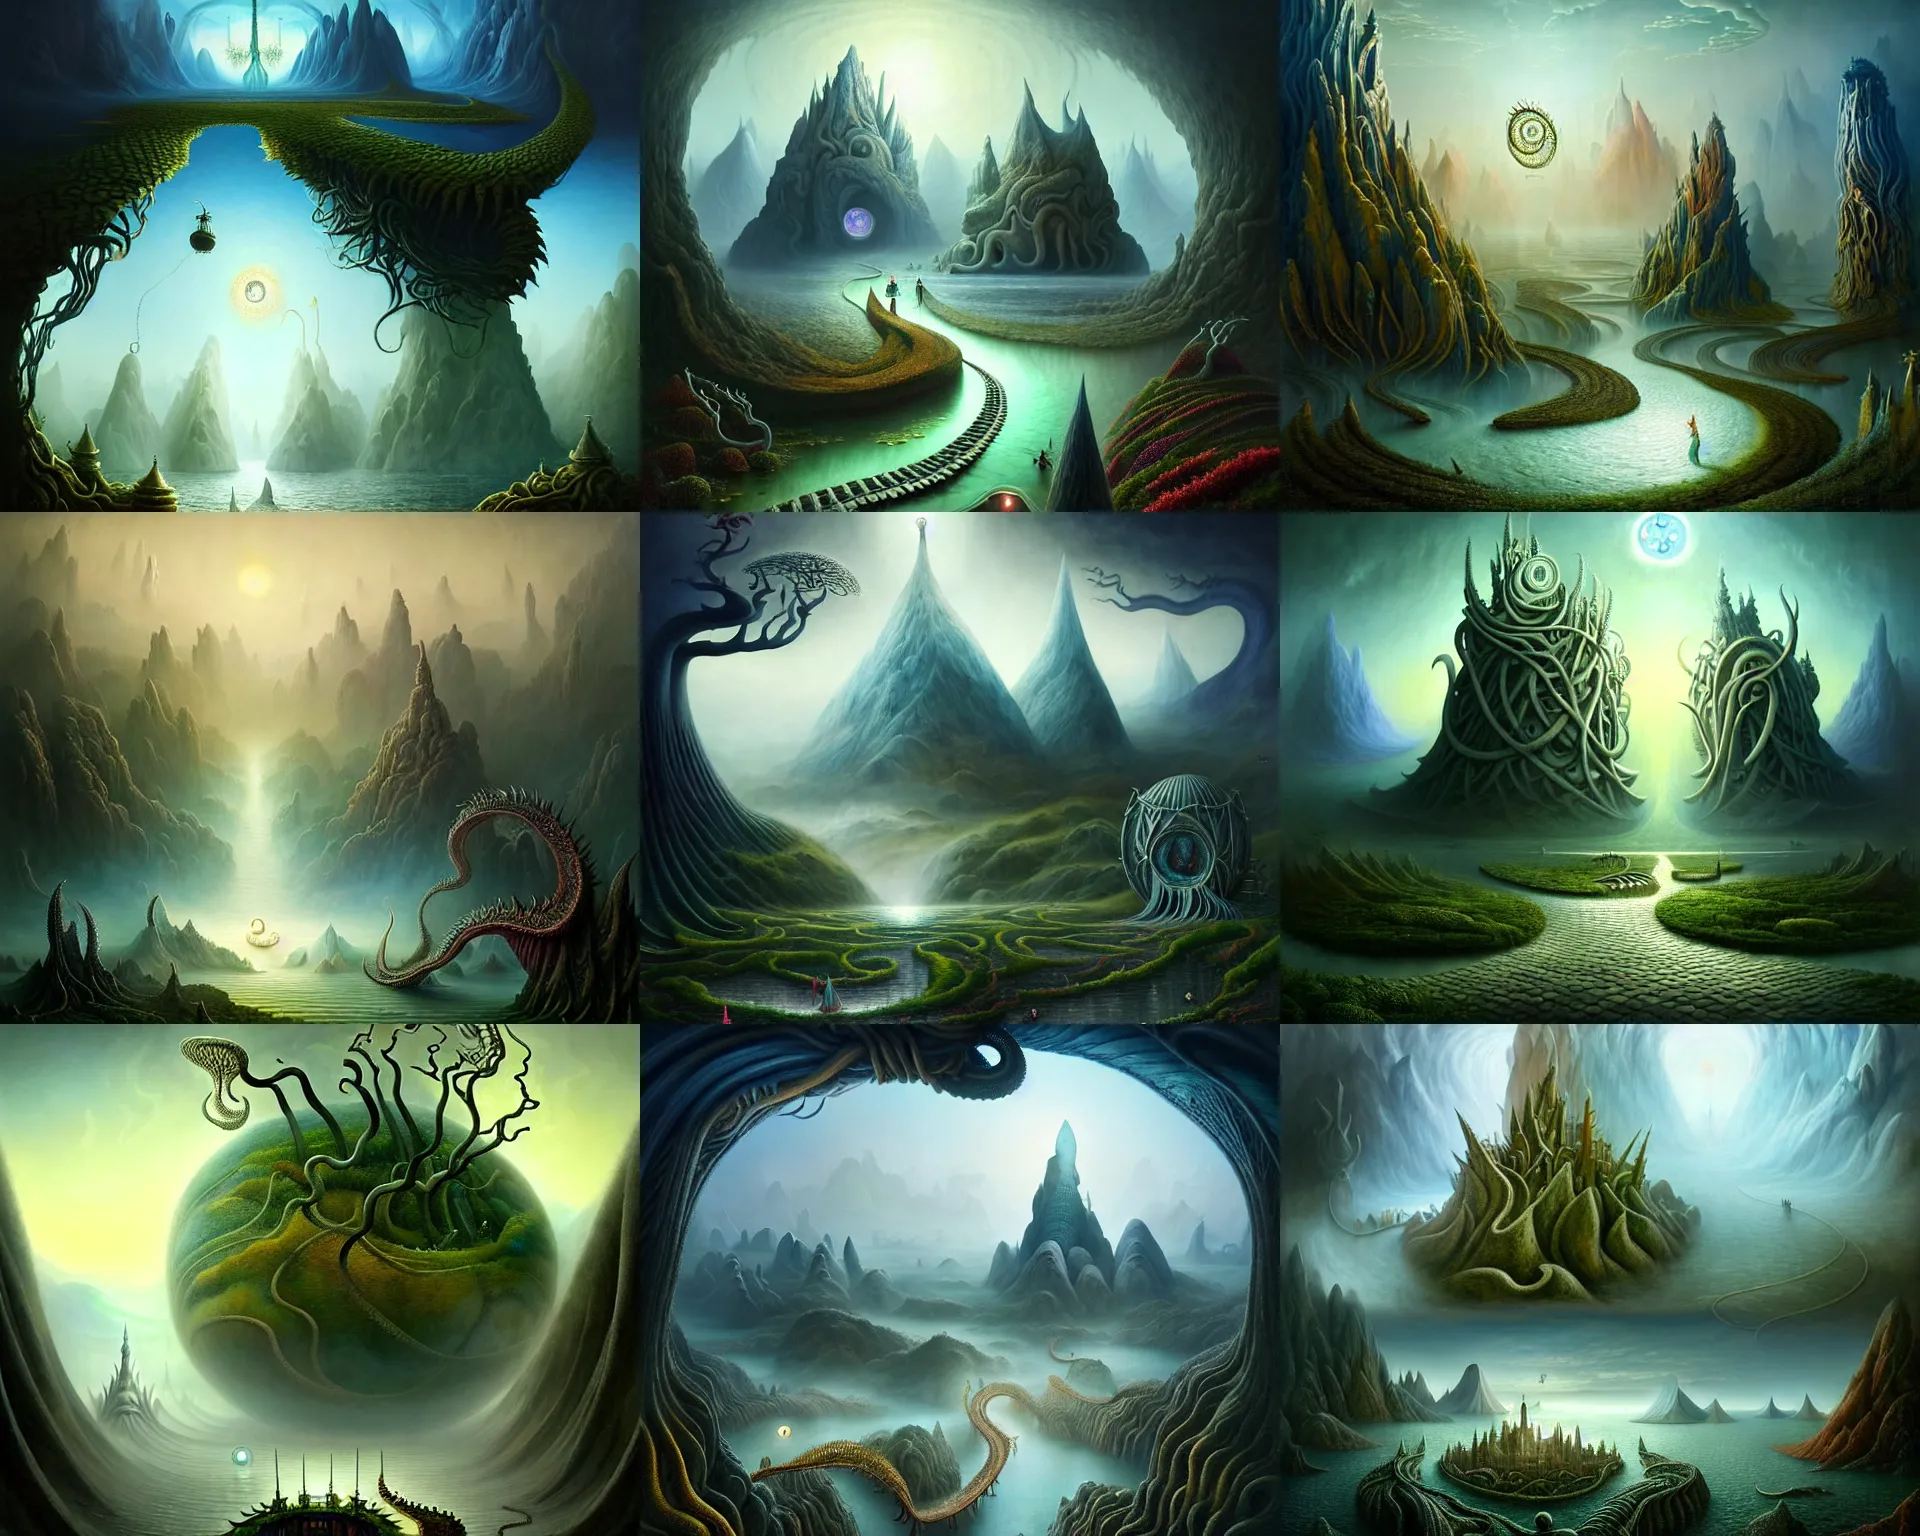 Prompt: a beguiling epic stunning beautiful and insanely detailed matte painting of the impossible winding path through the land of the elder gods with surreal architecture designed by Heironymous Bosch, mega structures inspired by Heironymous Bosch's Garden of Earthly Delights, vast surreal landscape and horizon by Asher Durand and Cyril Rolando and Natalie Shau, masterpiece!!!, grand!, imaginative!!!, whimsical!!, epic scale, intricate details, sense of awe, elite, wonder, insanely complex, masterful composition!!!, sharp focus, fantasy realism, dramatic lighting